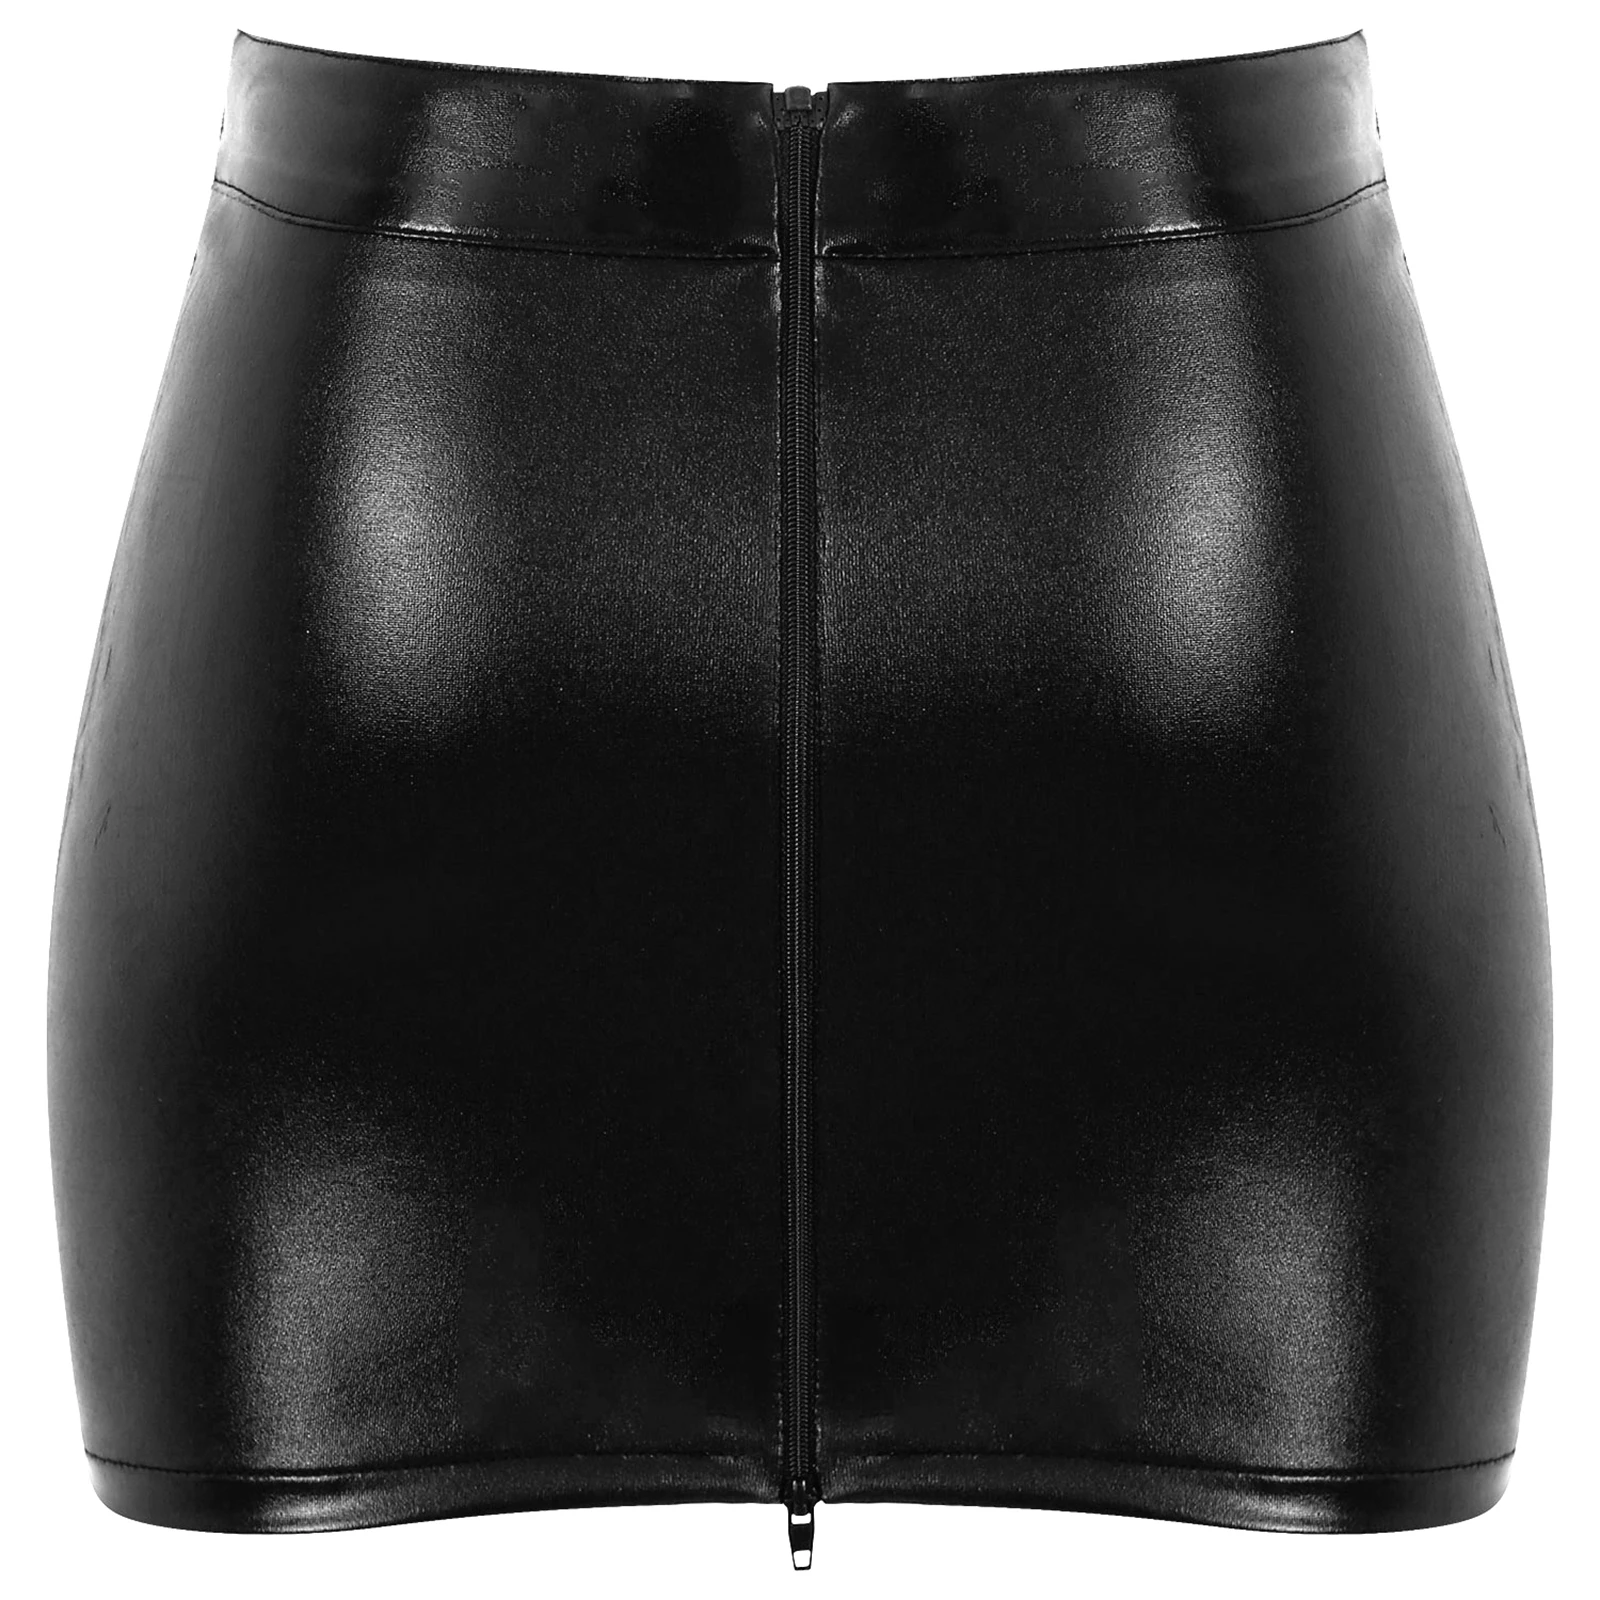 Womens Fashion Zipper Back Skirt Shiny Patent Leather Miniskirt Pole Dancing Rave Costume Sexy Night Club Party Clubwear Skirts images - 6